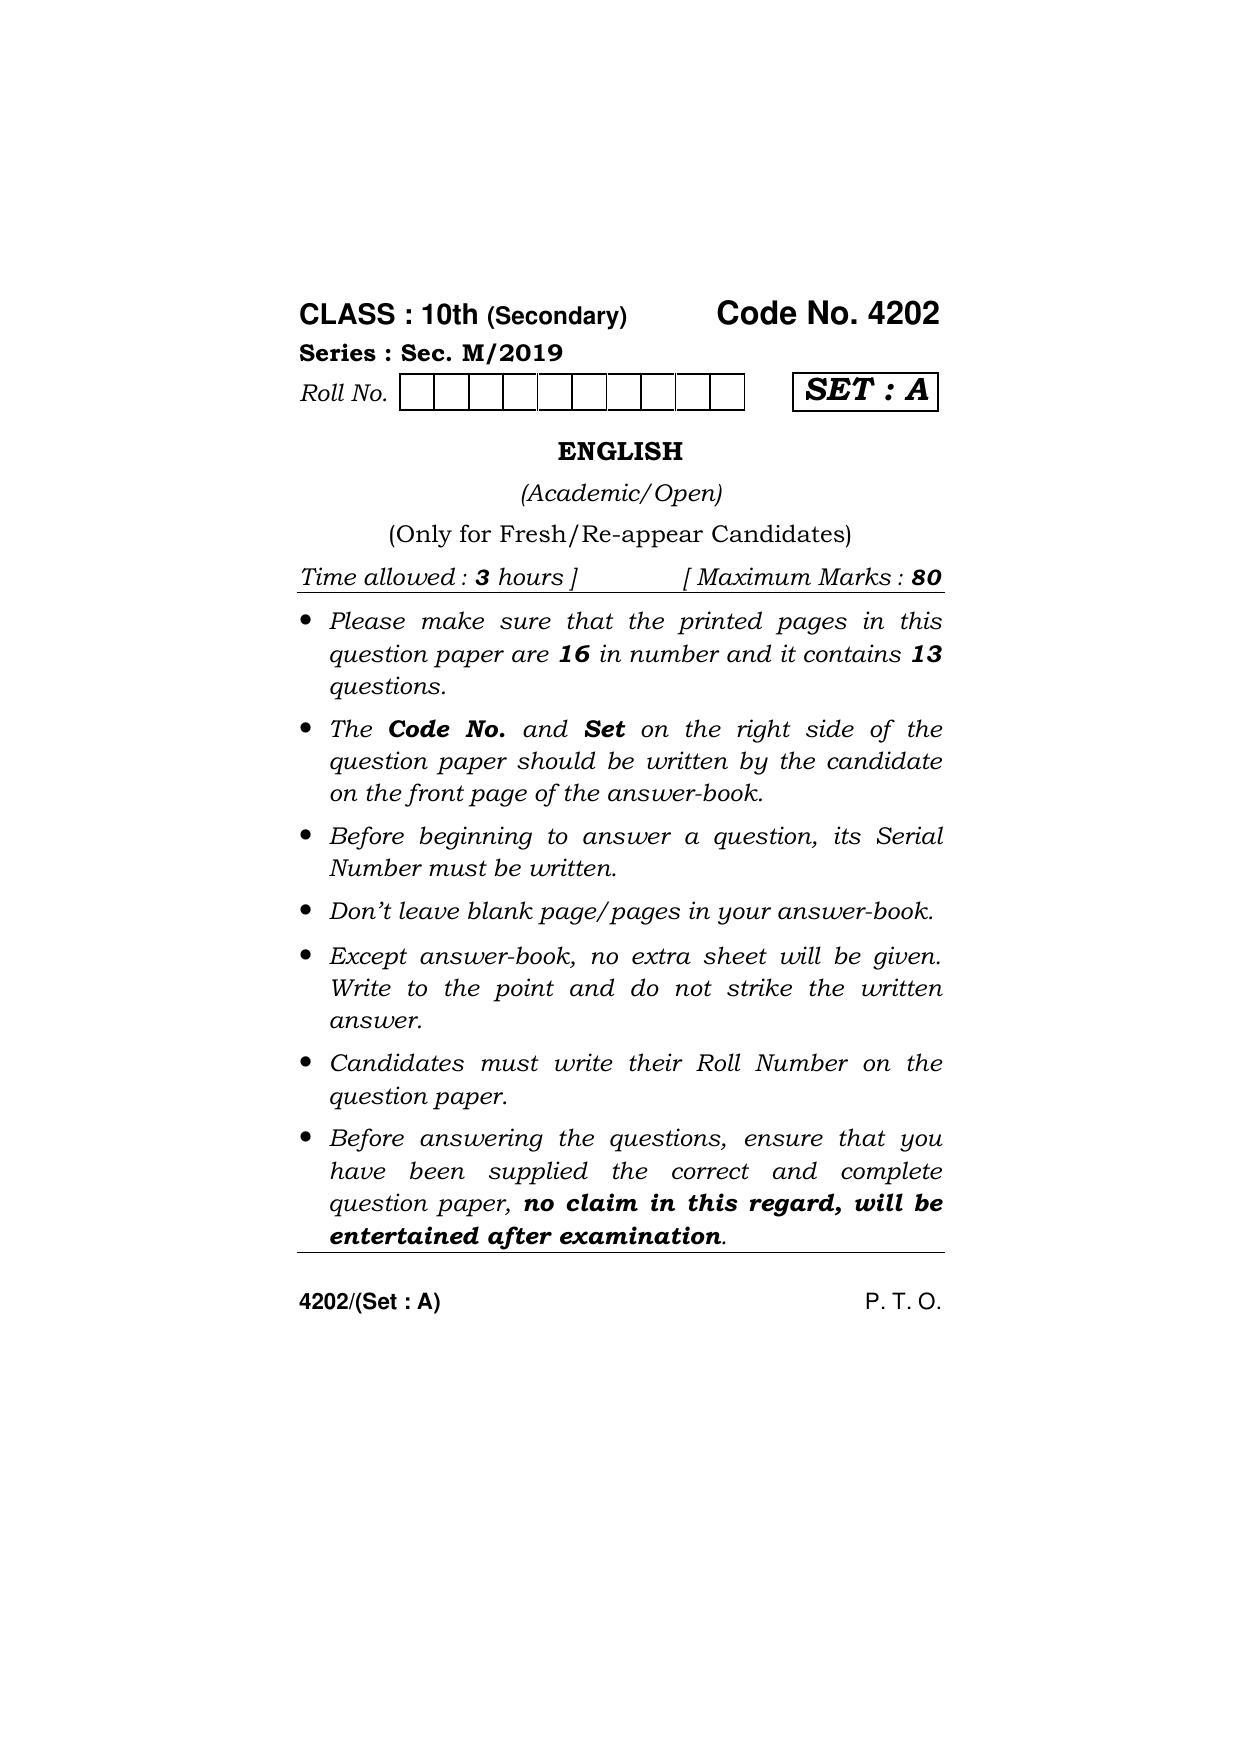 Haryana Board HBSE Class 10 English (All Set) 2019 Question Paper - Page 1